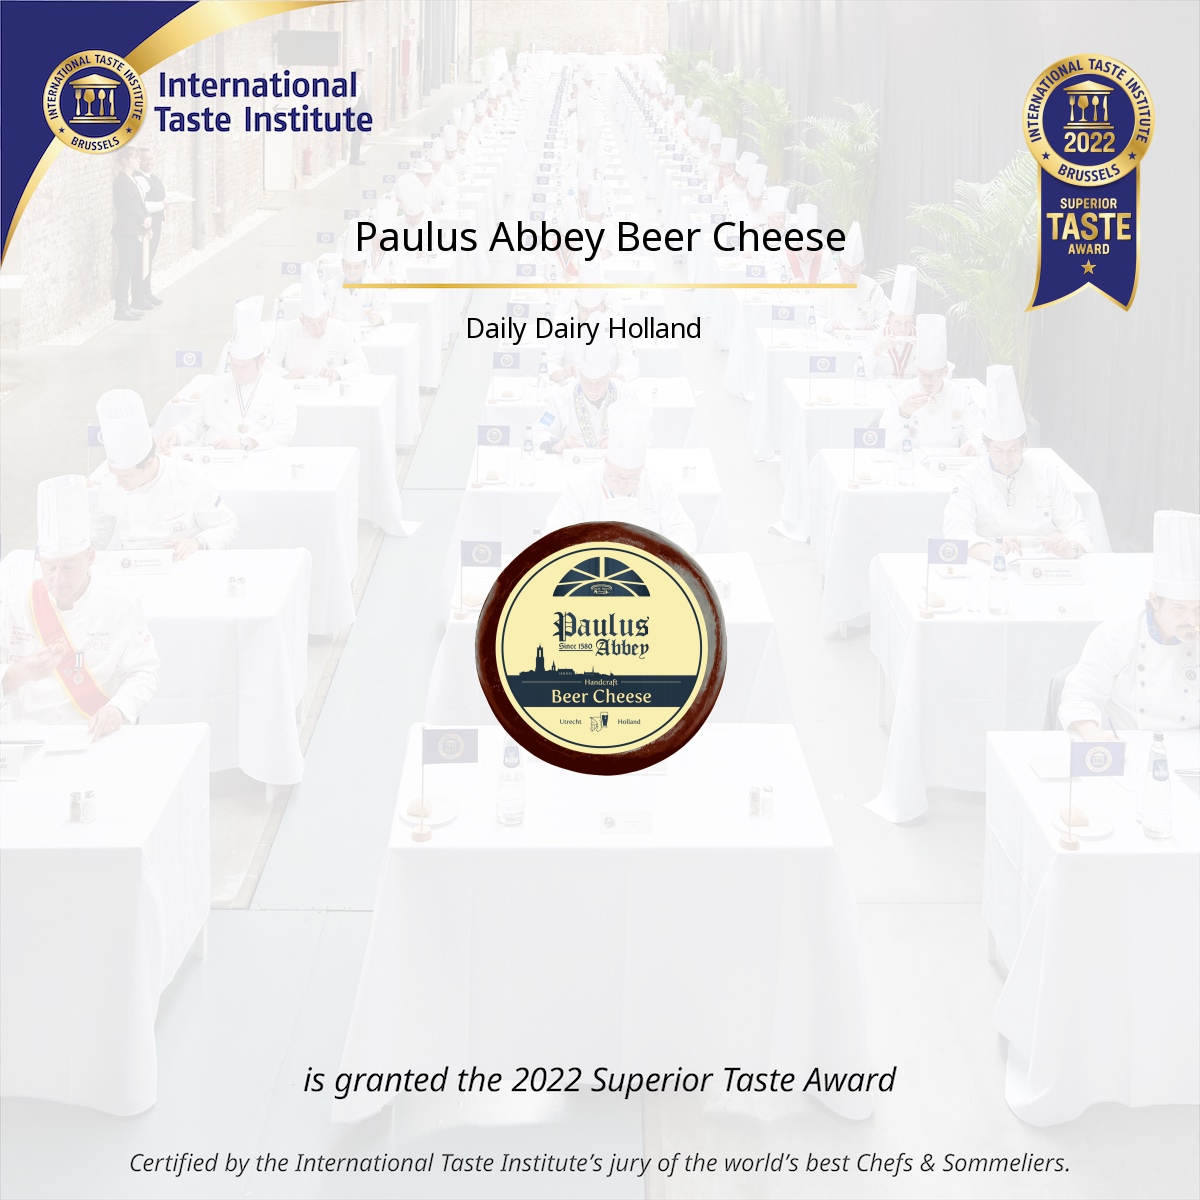 Square image of Paulus Abbey Beer Cheese